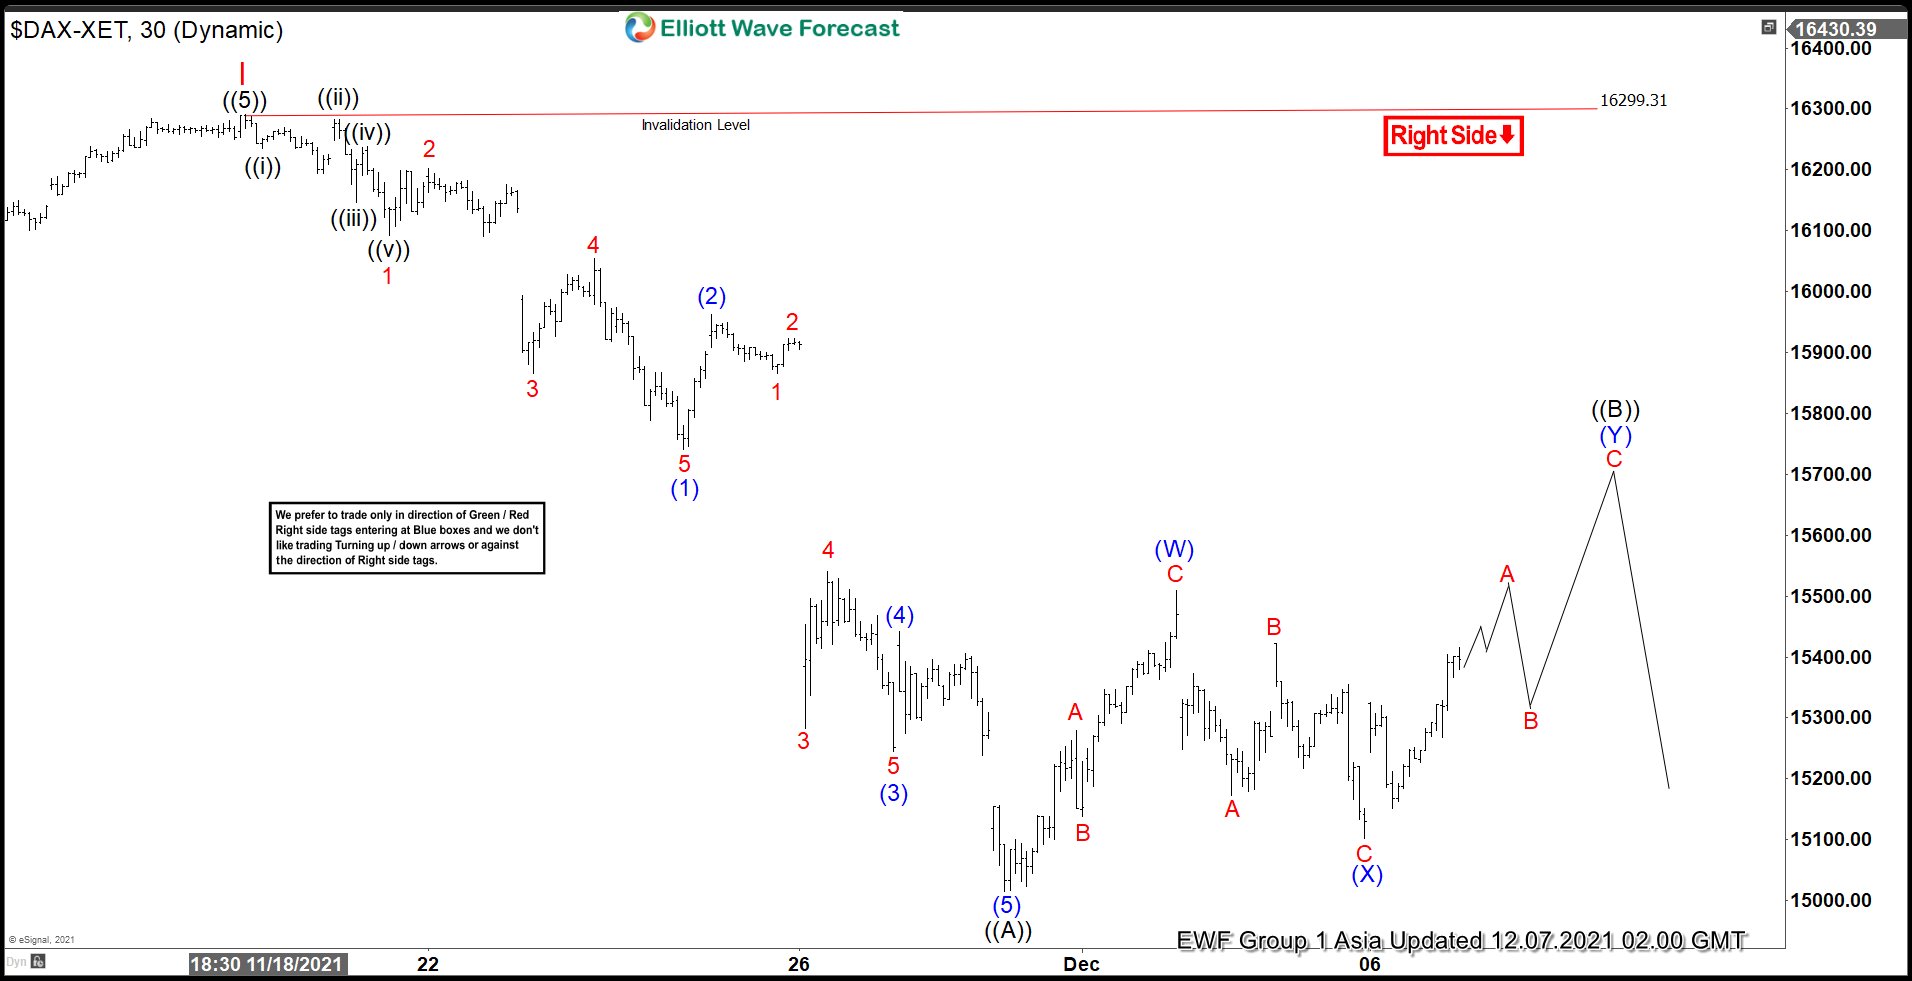 Elliott Wave View: Rally in DAX Expected to Fail